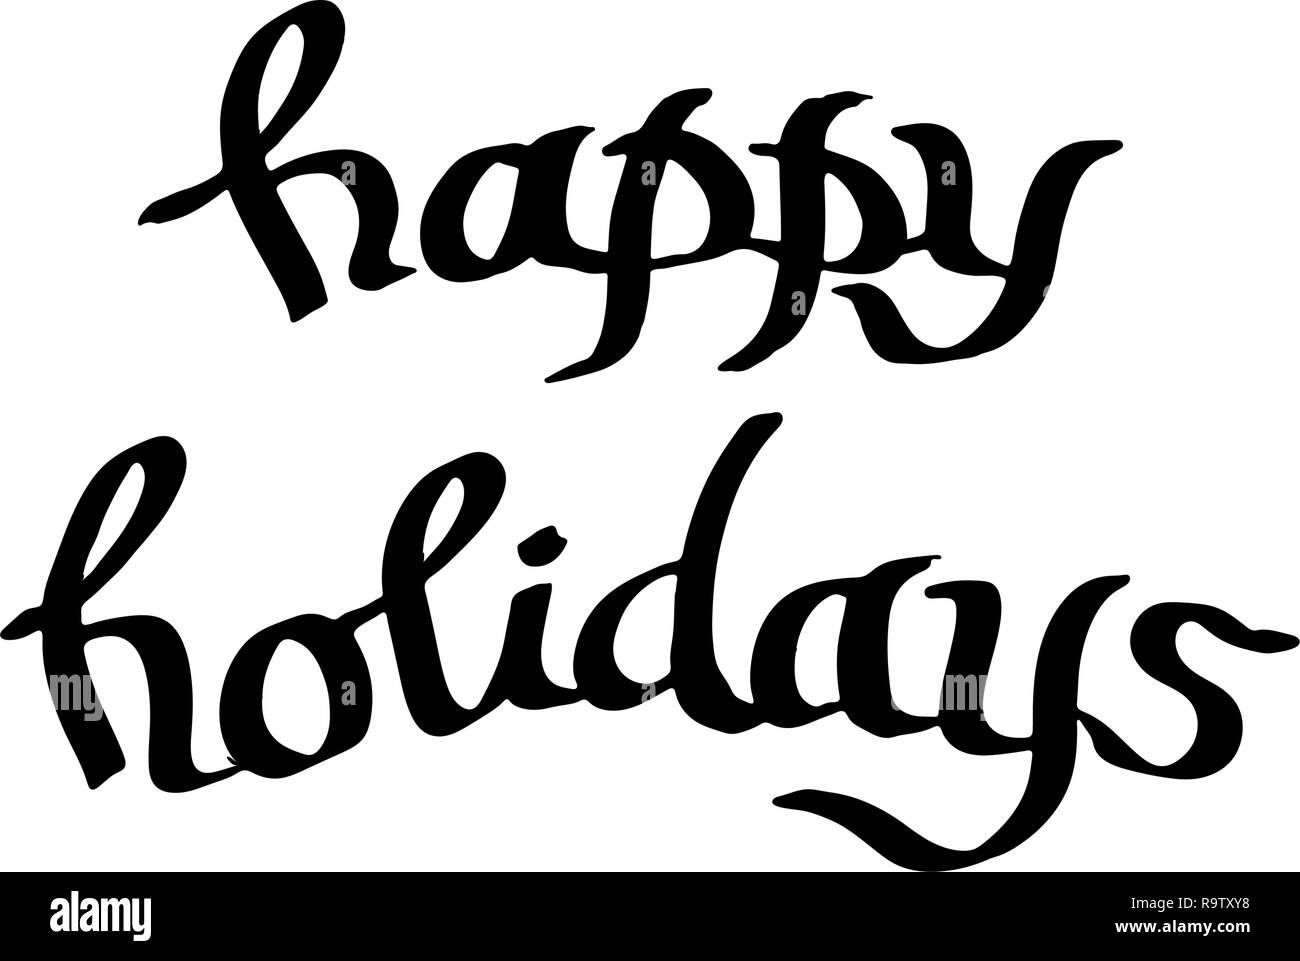 Vector Happy Holidays handwriting calligraphy. Black and white engraved ink art. Isolated text illustration element. Stock Vector